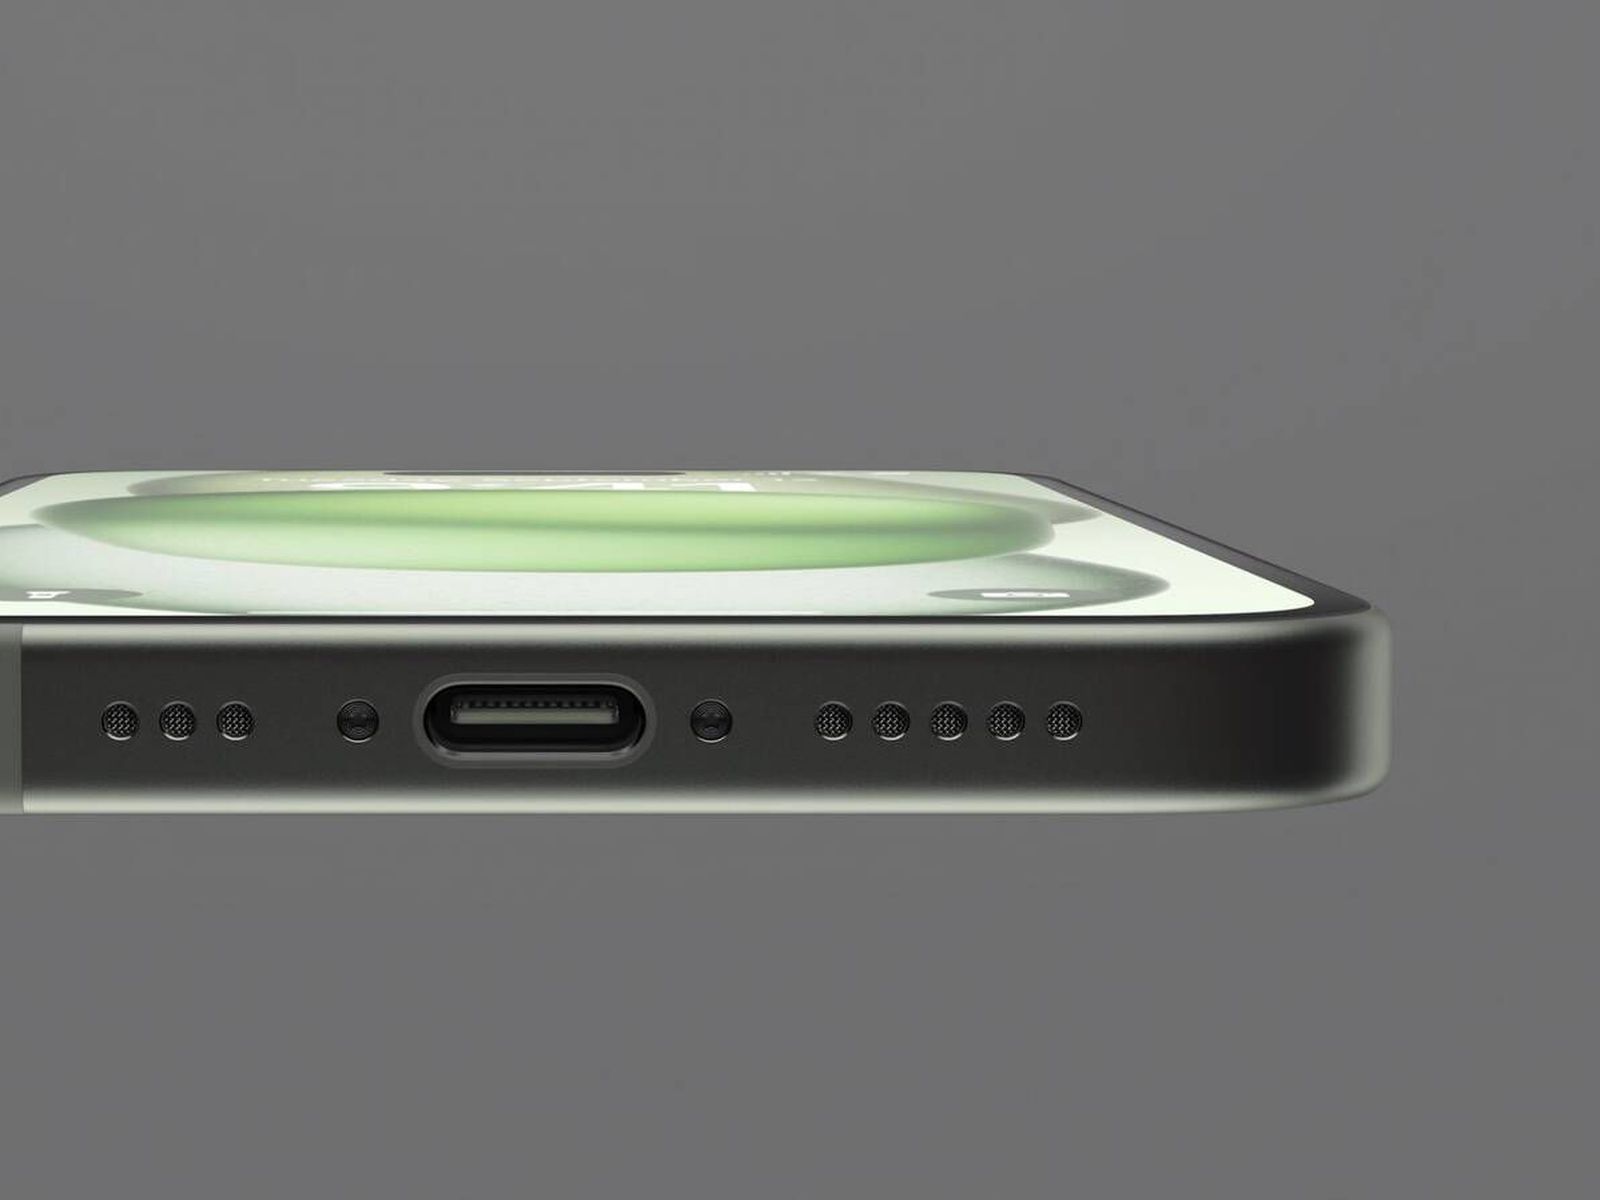 iPhone Shift Brings USB-C Closer to Universal Connector